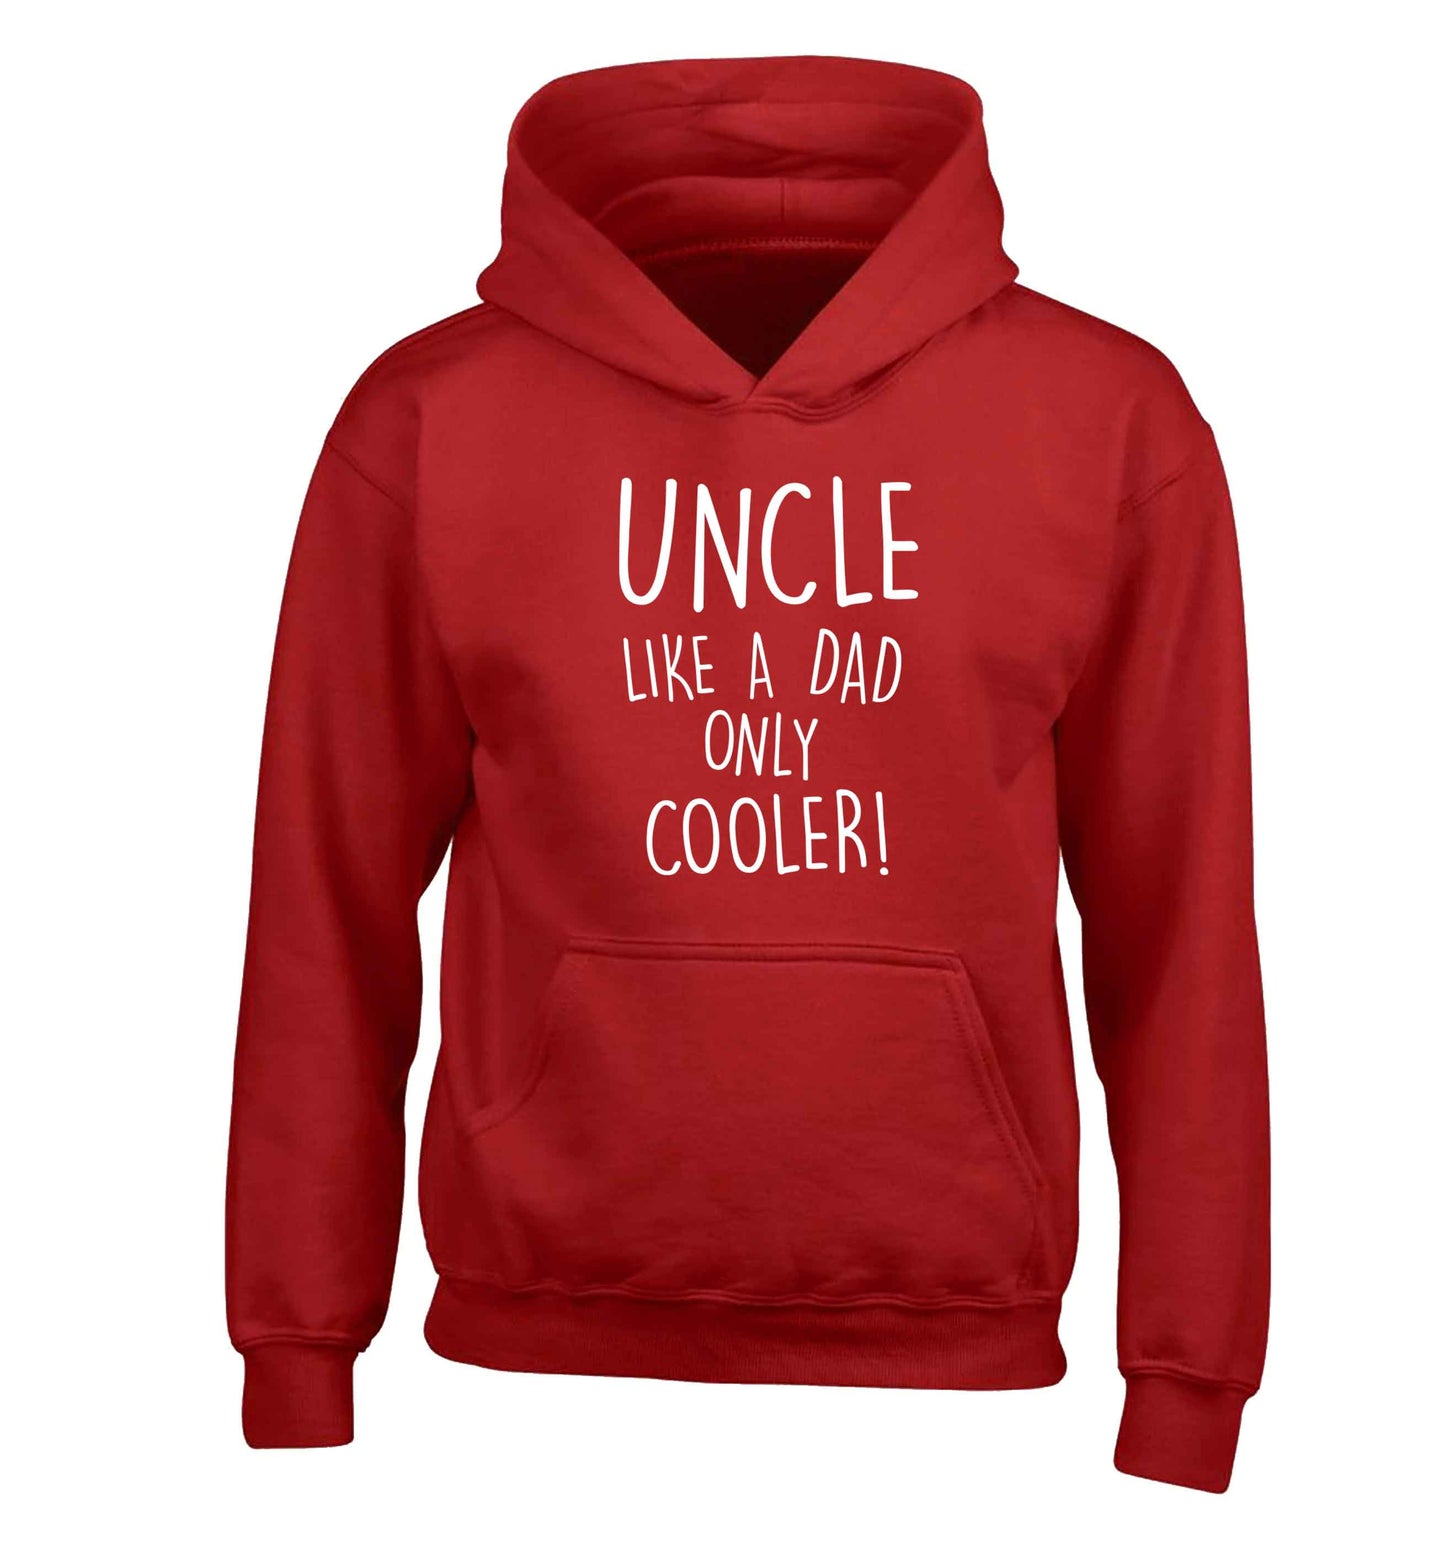 Uncle like a dad only cooler children's red hoodie 12-13 Years